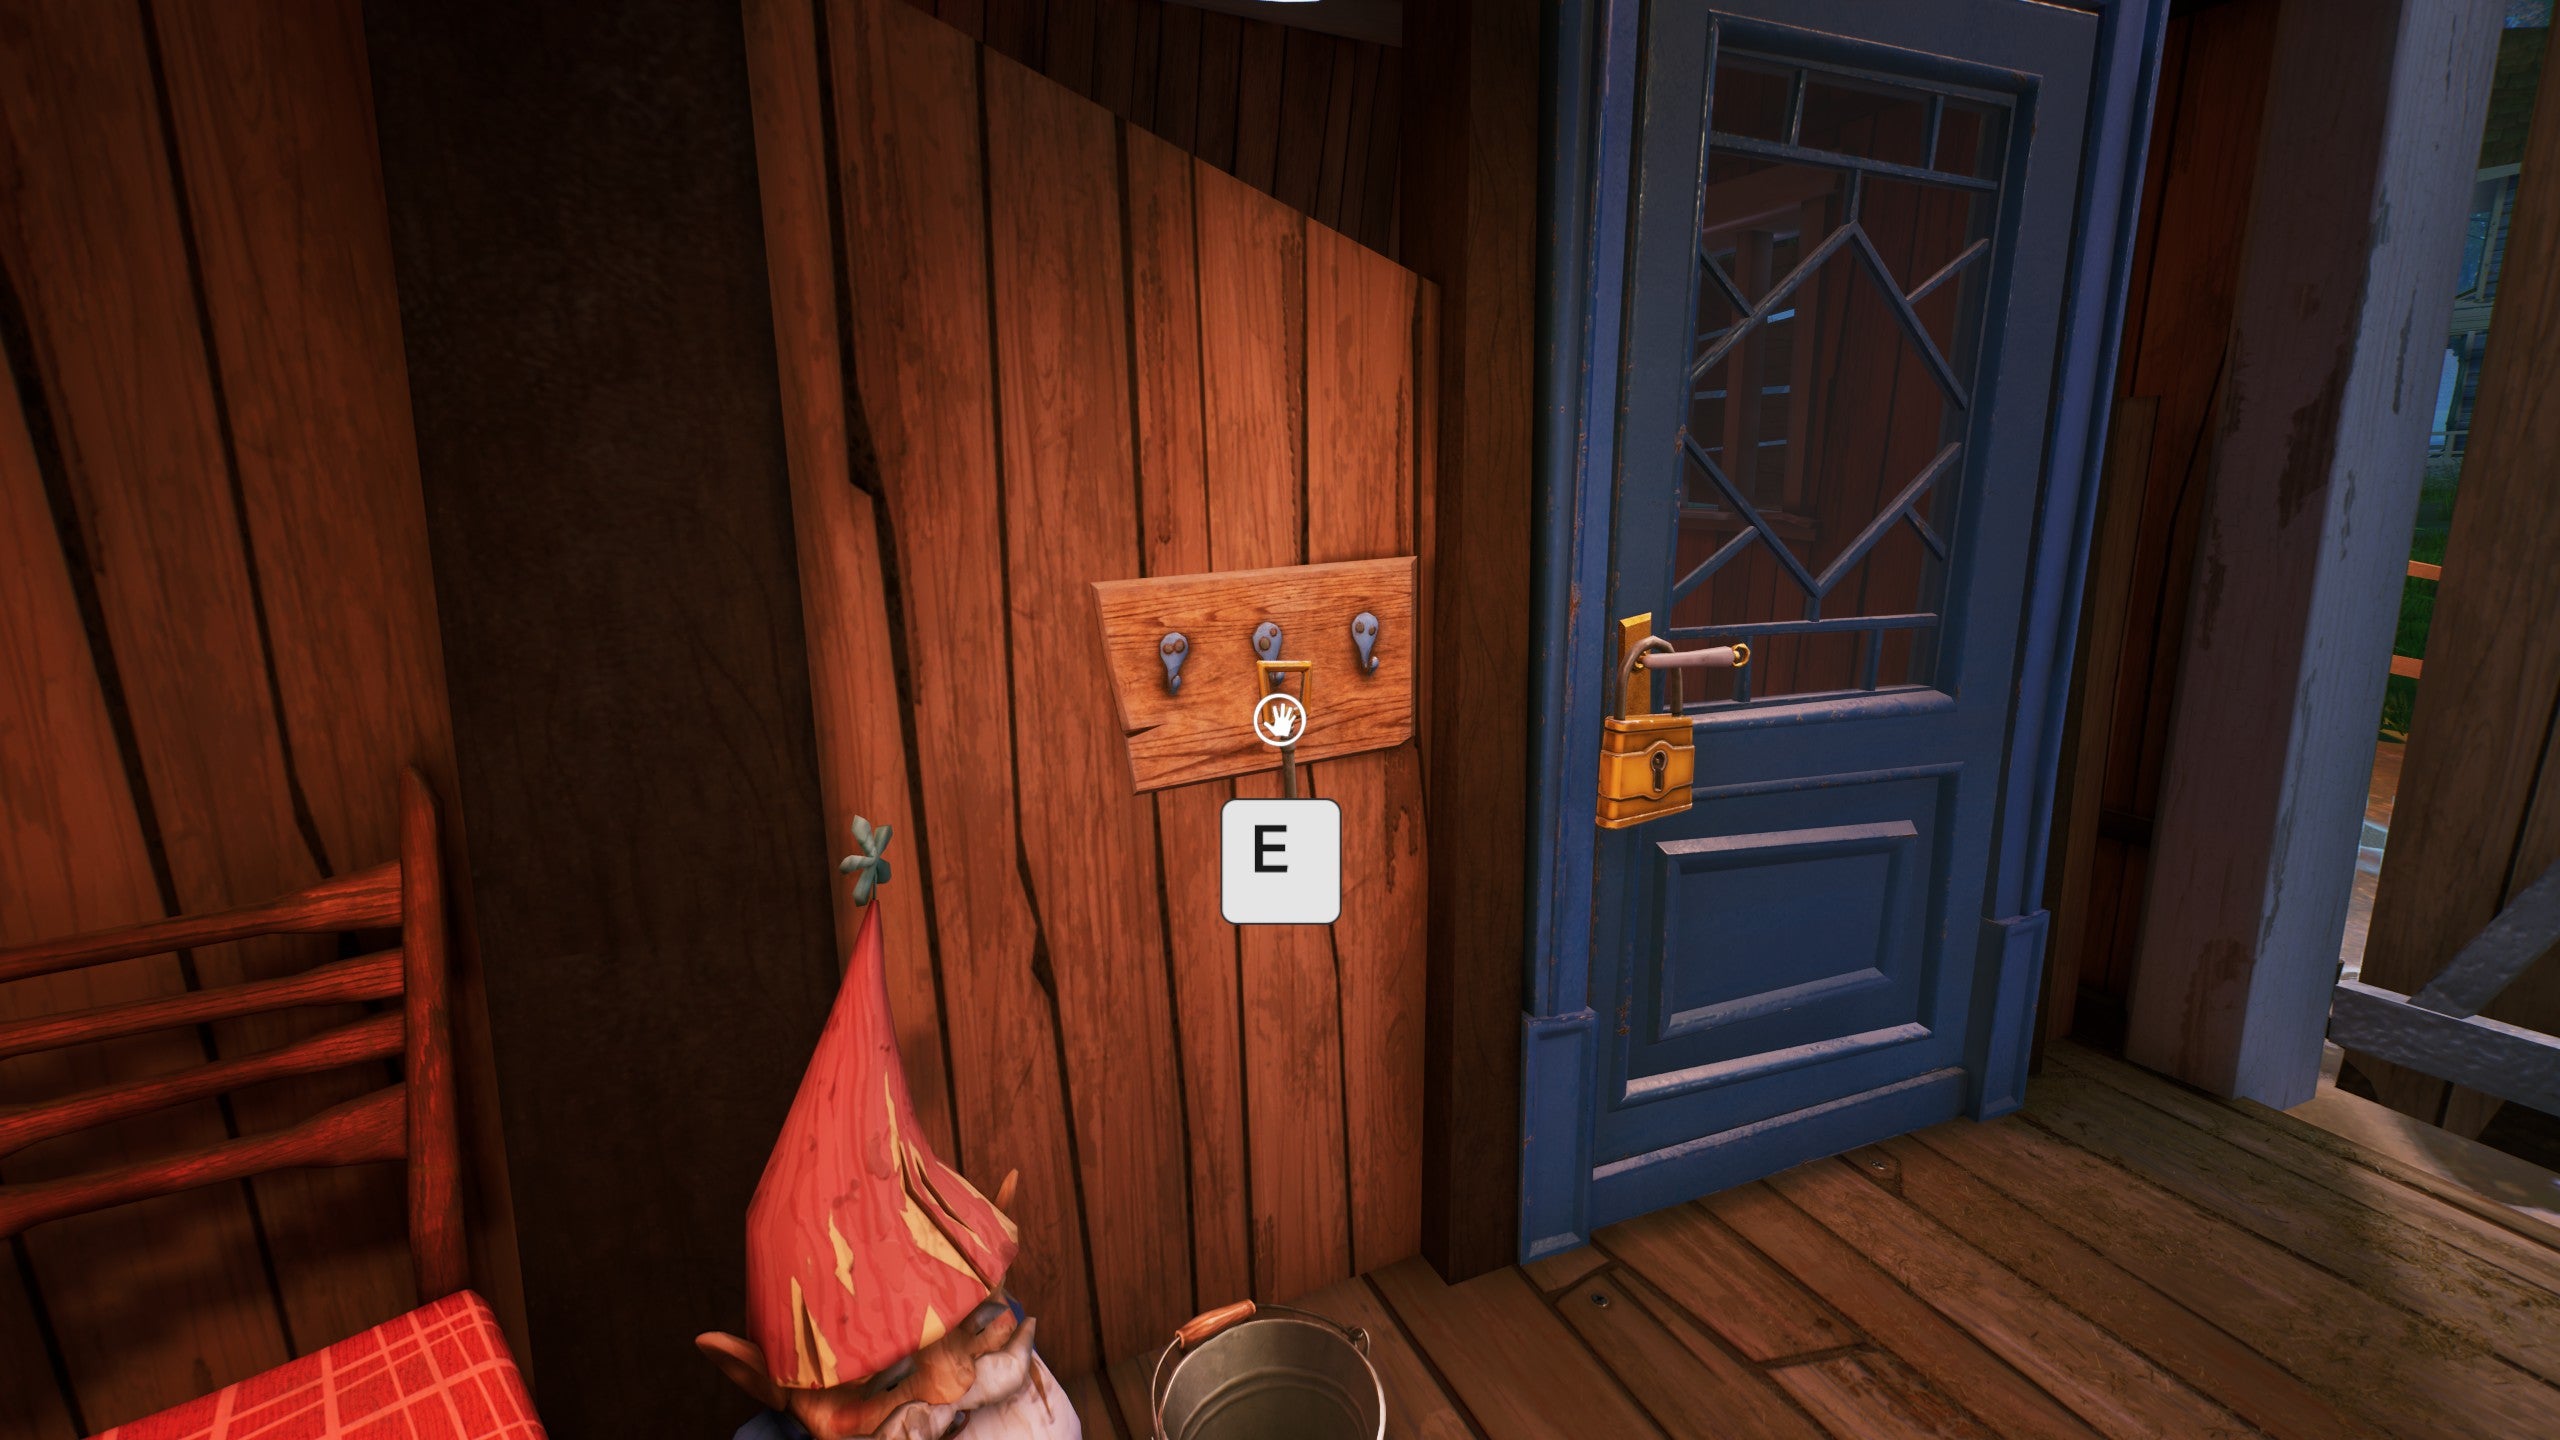 A key hanging on a rack in the barn in Hello Neighbor 2